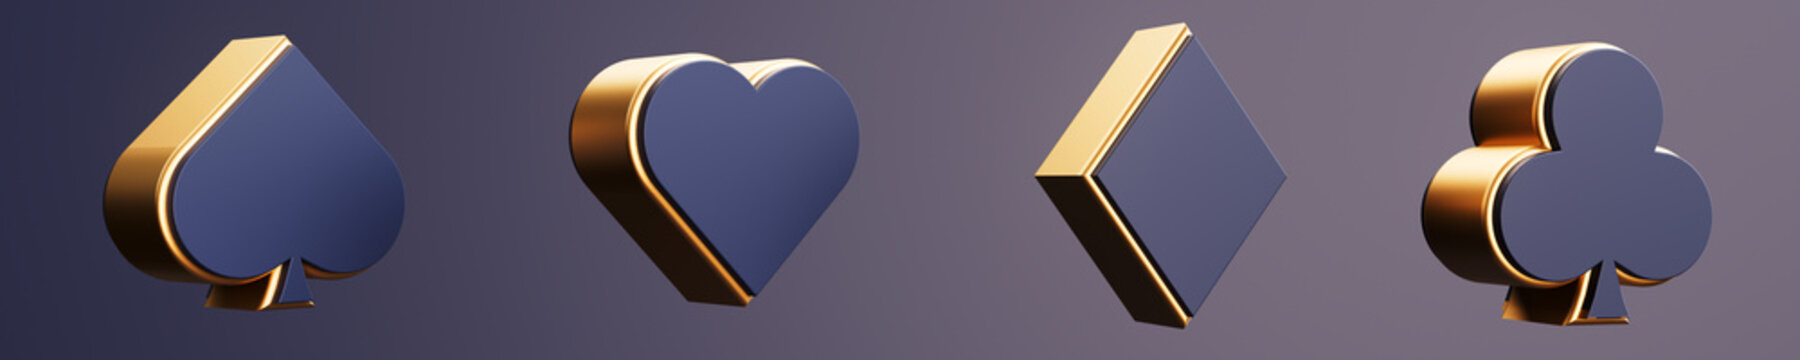 Aces playing cards symbolize clubs, diamonds, spades and hearts in gold and black. 3d rendering illustration